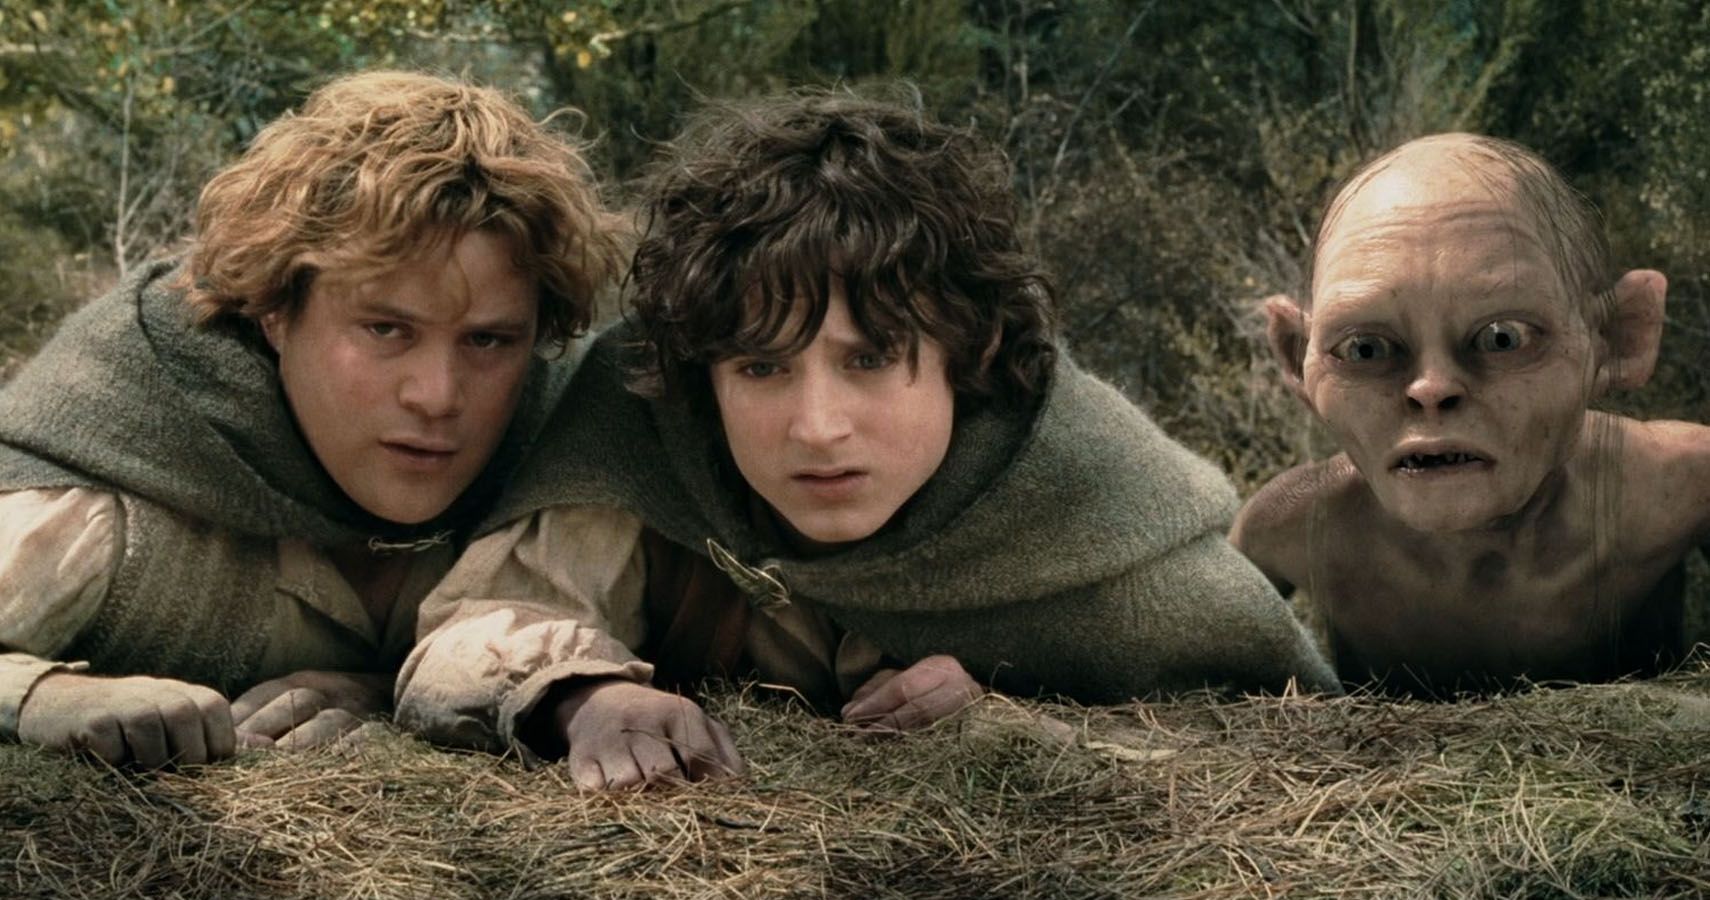 Since Gollum was originally a Hobbit, does that mean that Hobbits